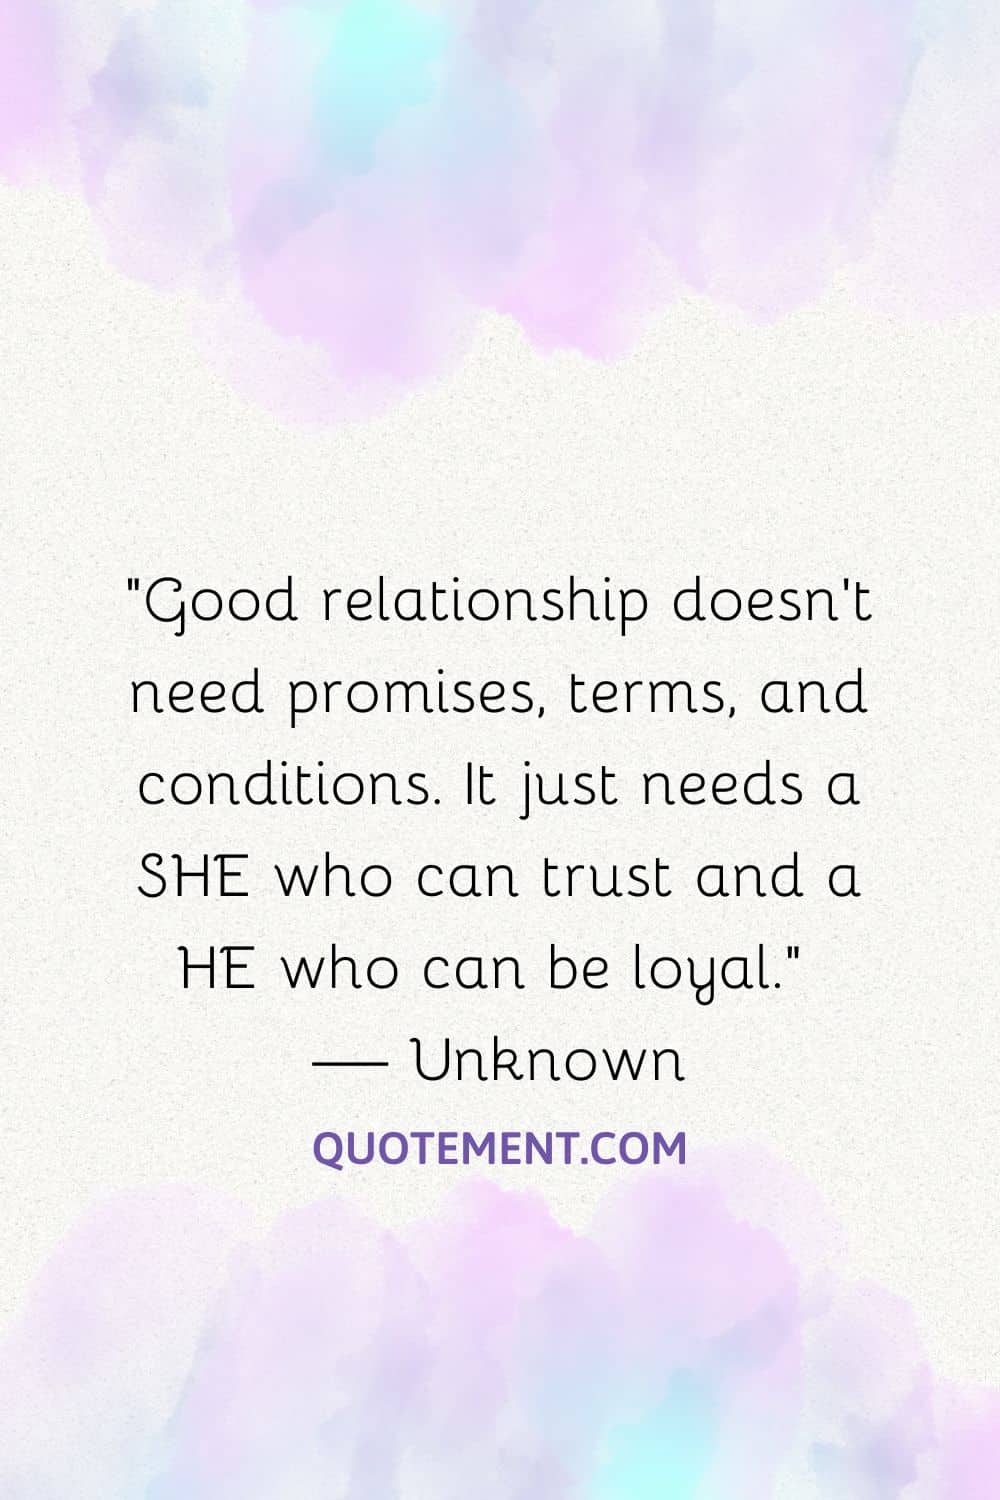 Good relationship doesn’t need promises, terms, and conditions. It just needs a SHE who can trust and a HE who can be loyal.